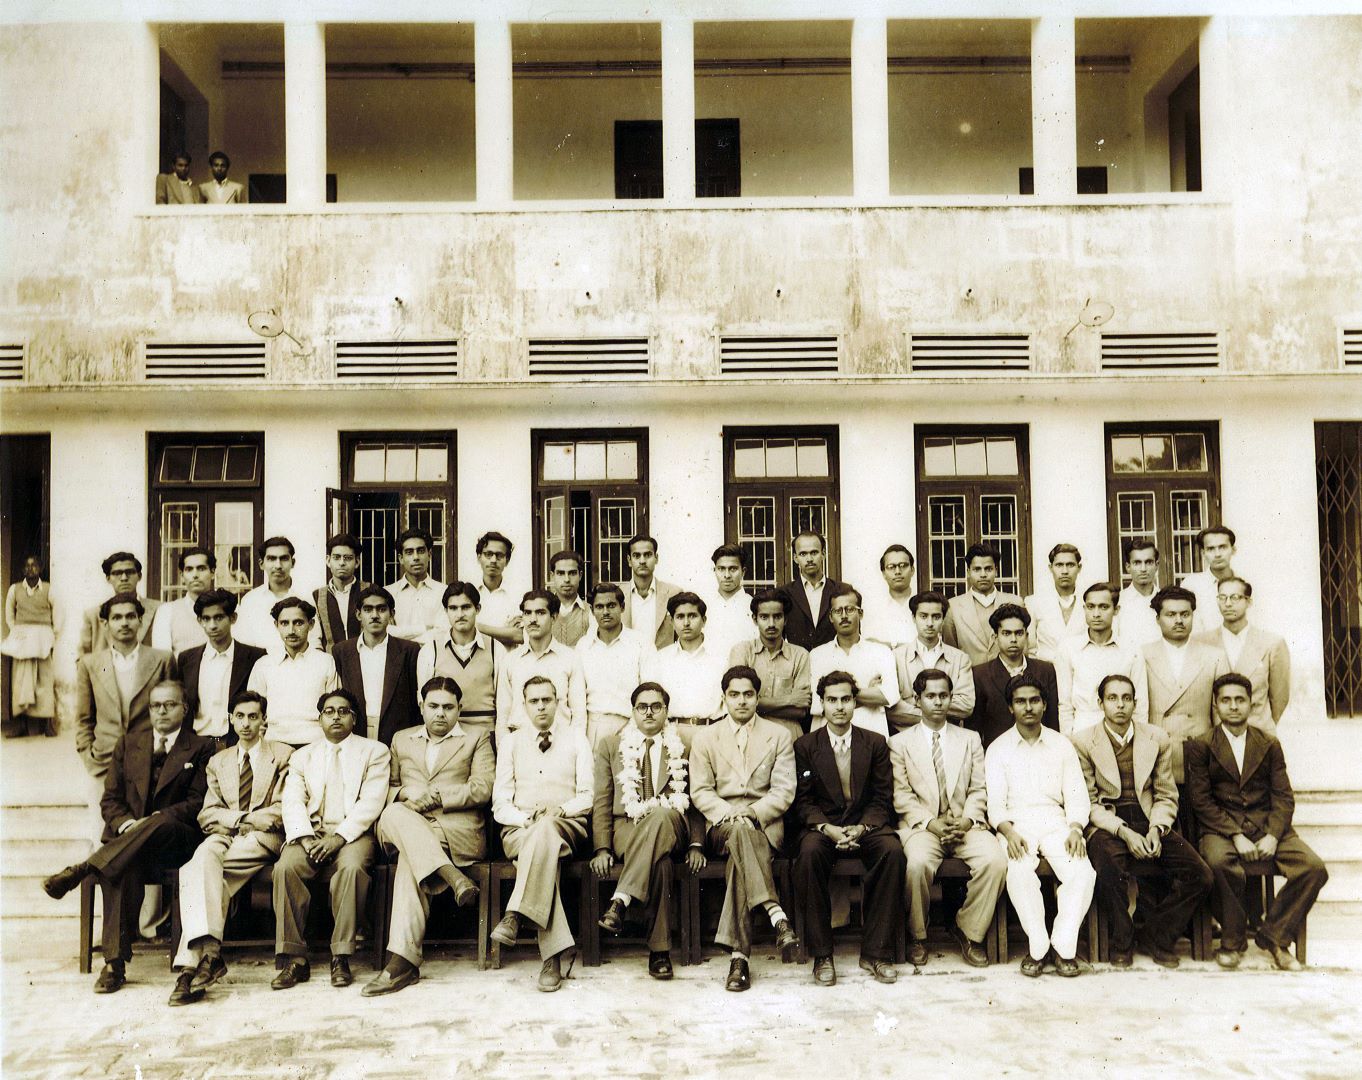 Untitled Old Photo of Dept of EEE, BUET